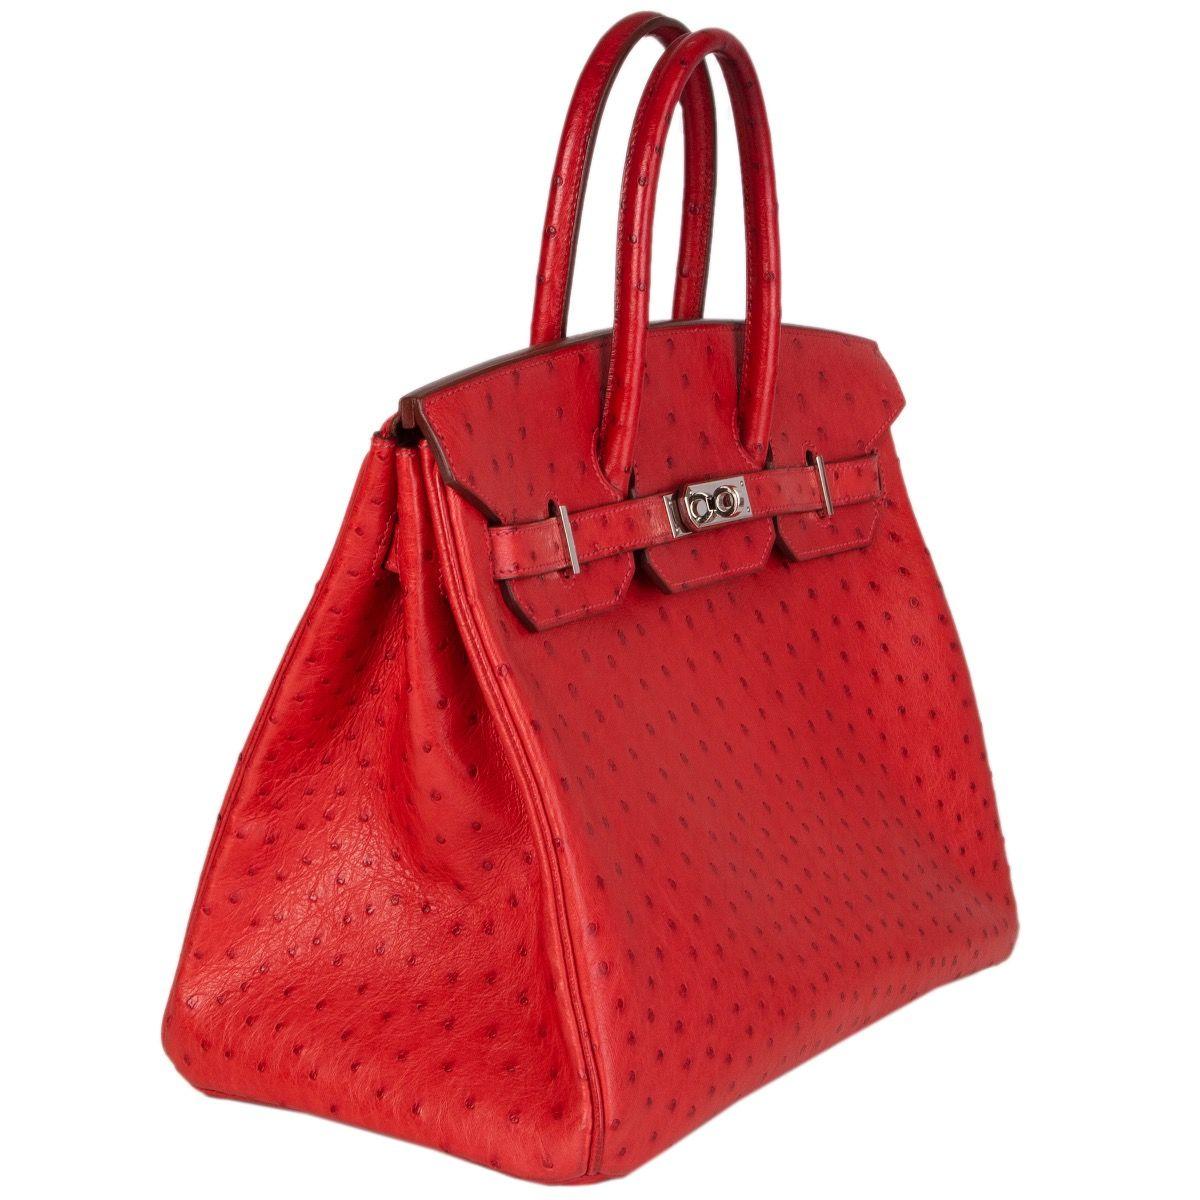 Hermès 'Birkin 35' bag in Rouge Vif ostrich leather. Lined in Chevre (goat skin) with an open pocket against the front and a zipper pocket against the back. Has been carried with slight darkening to the handles and bottom corners. Overall in